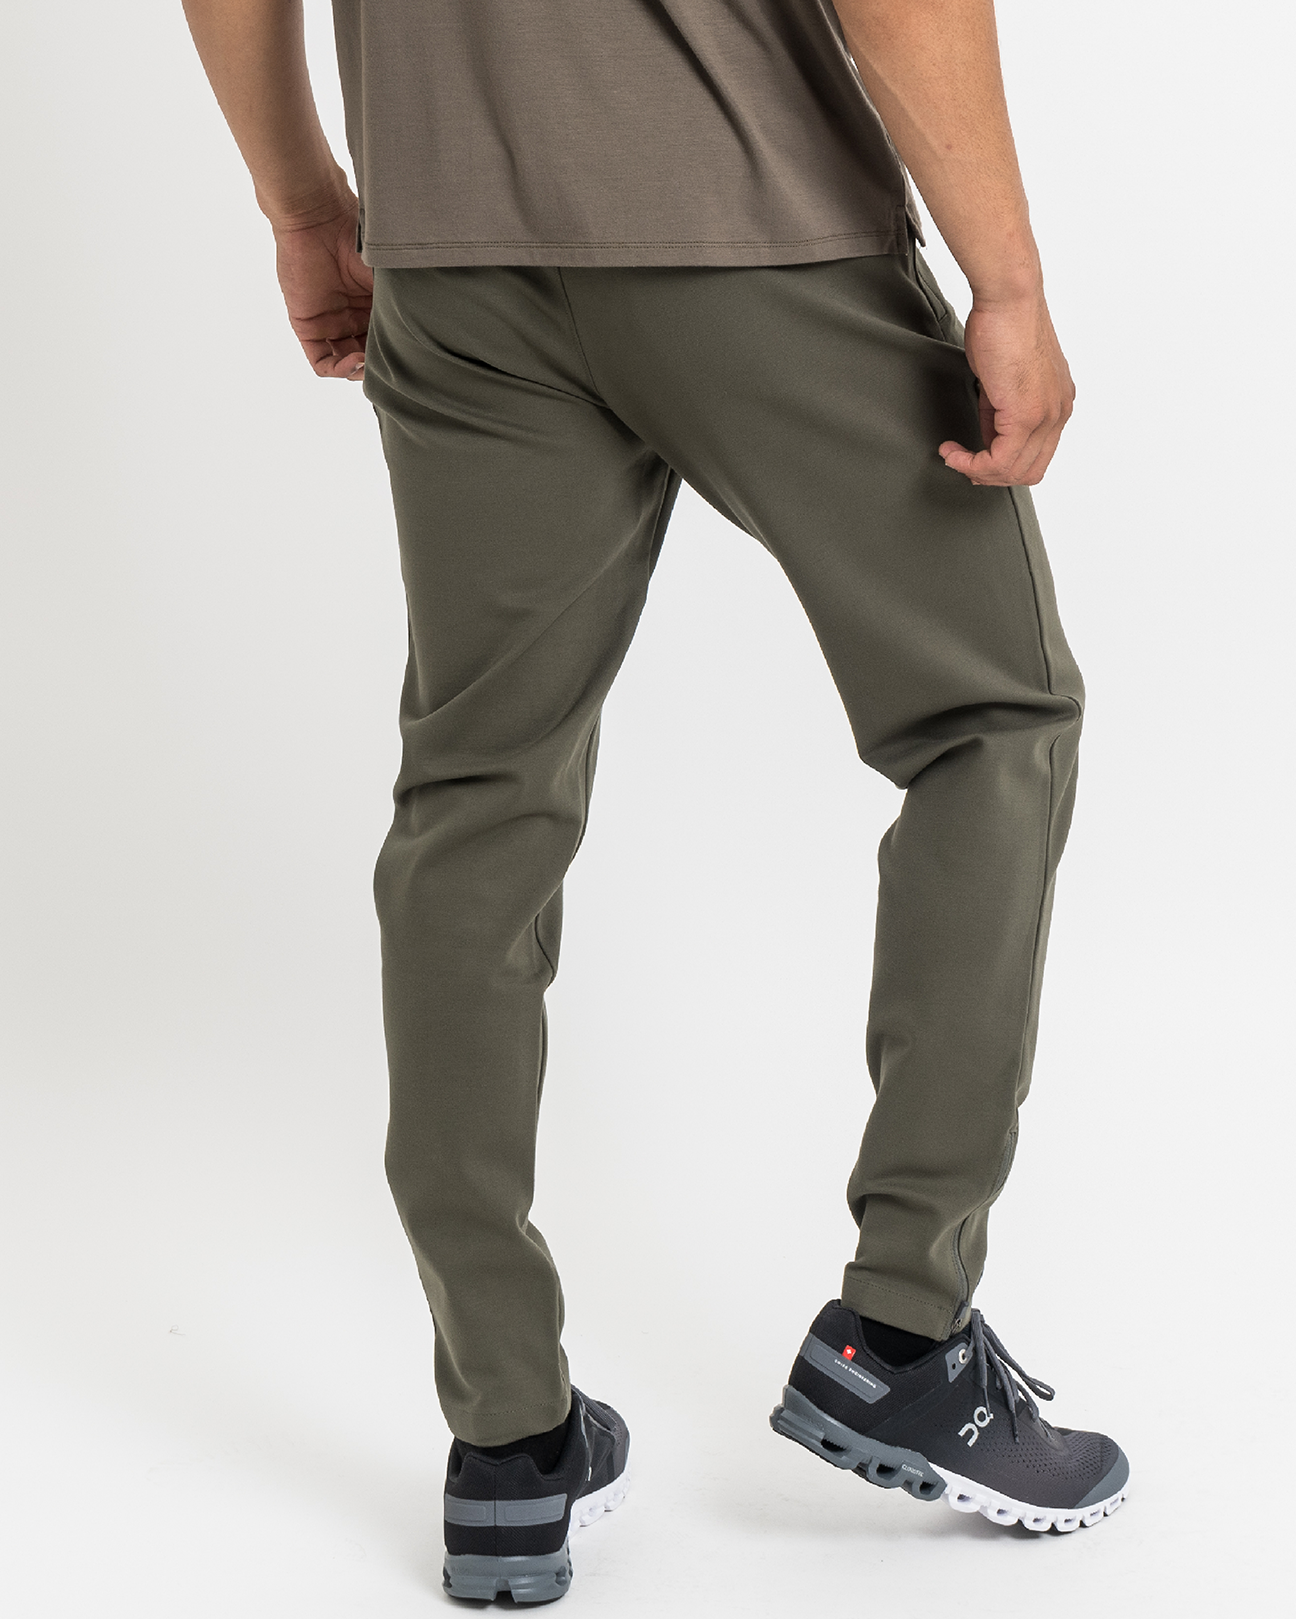 Commuter Trousers - Olive